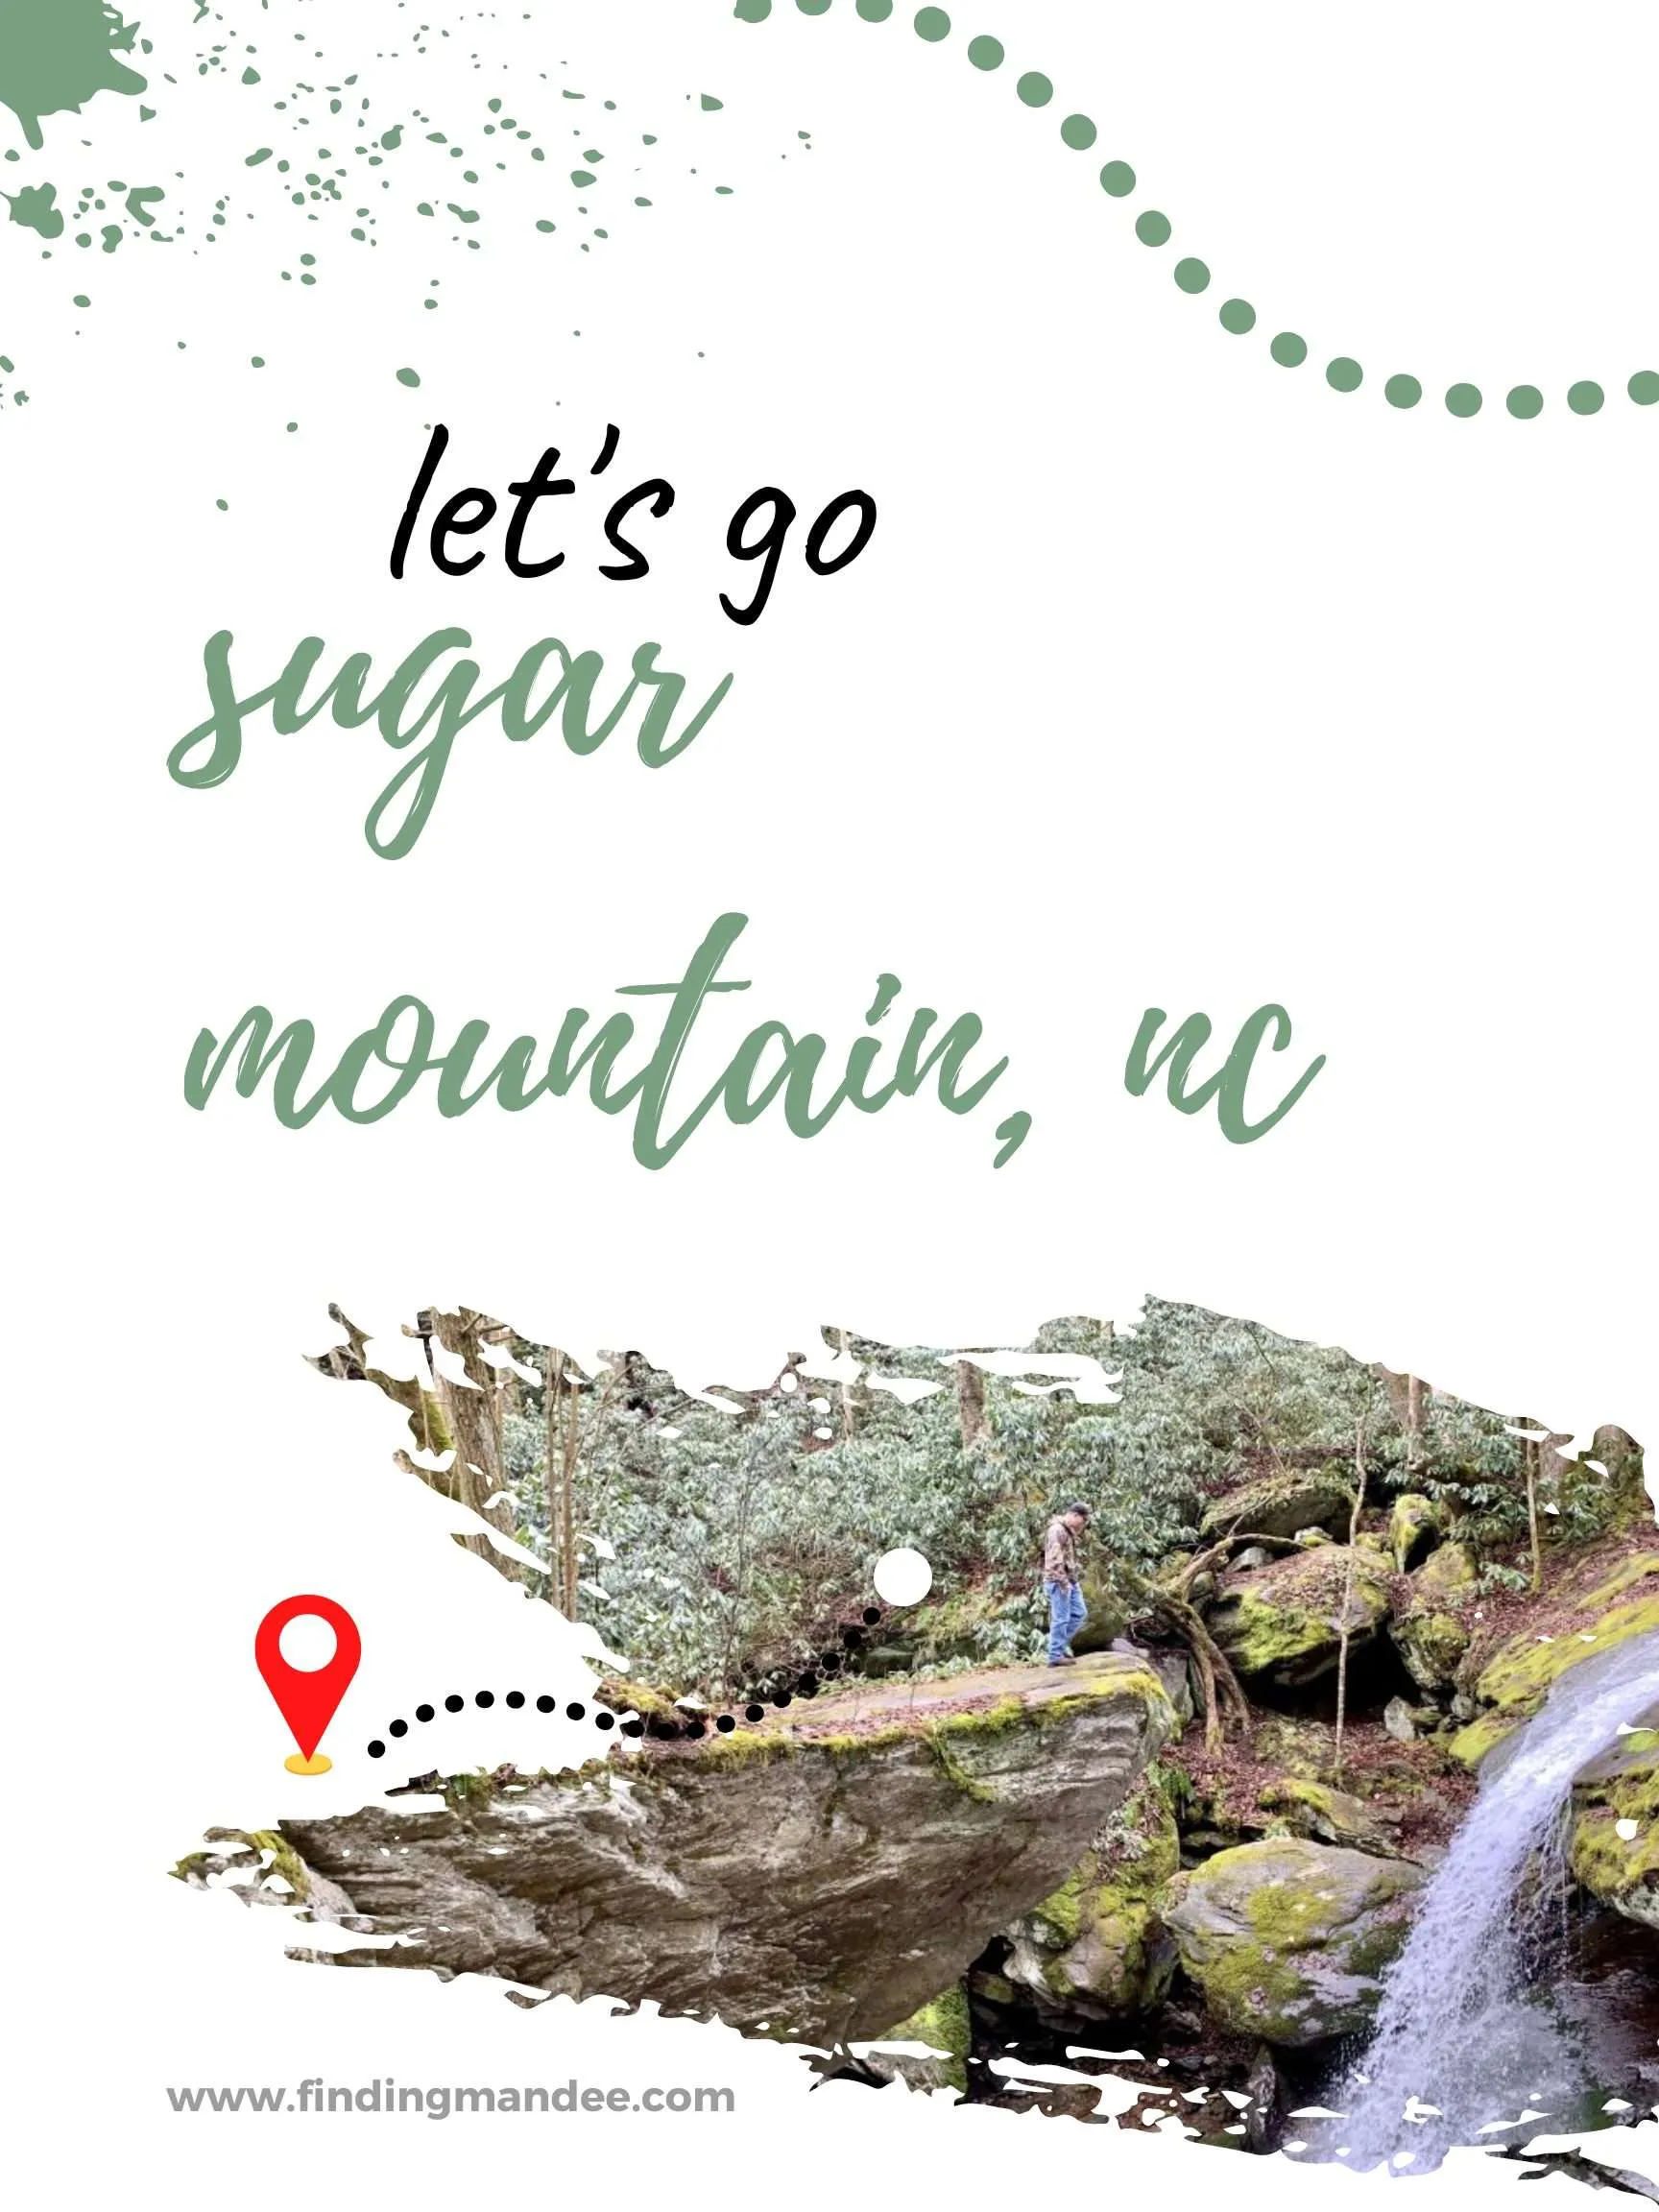 5 Things to do at Sugar Mountain, NC | Finding Mandee